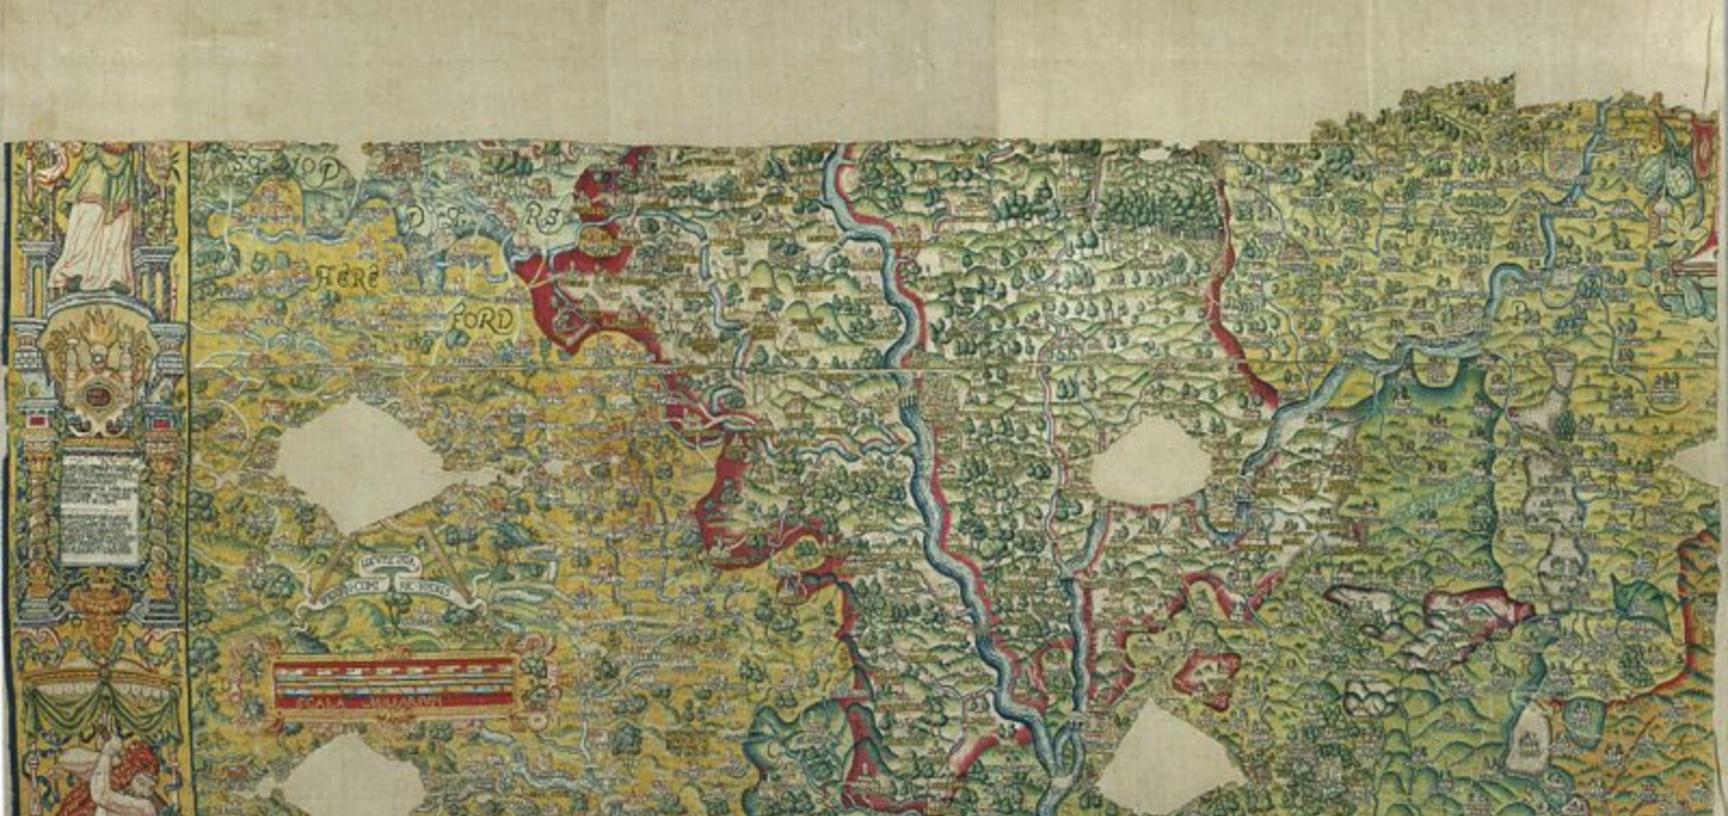 The Worcestershire portion of the Sheldon Tapestry Map - the colours are dull between the different counties depicted